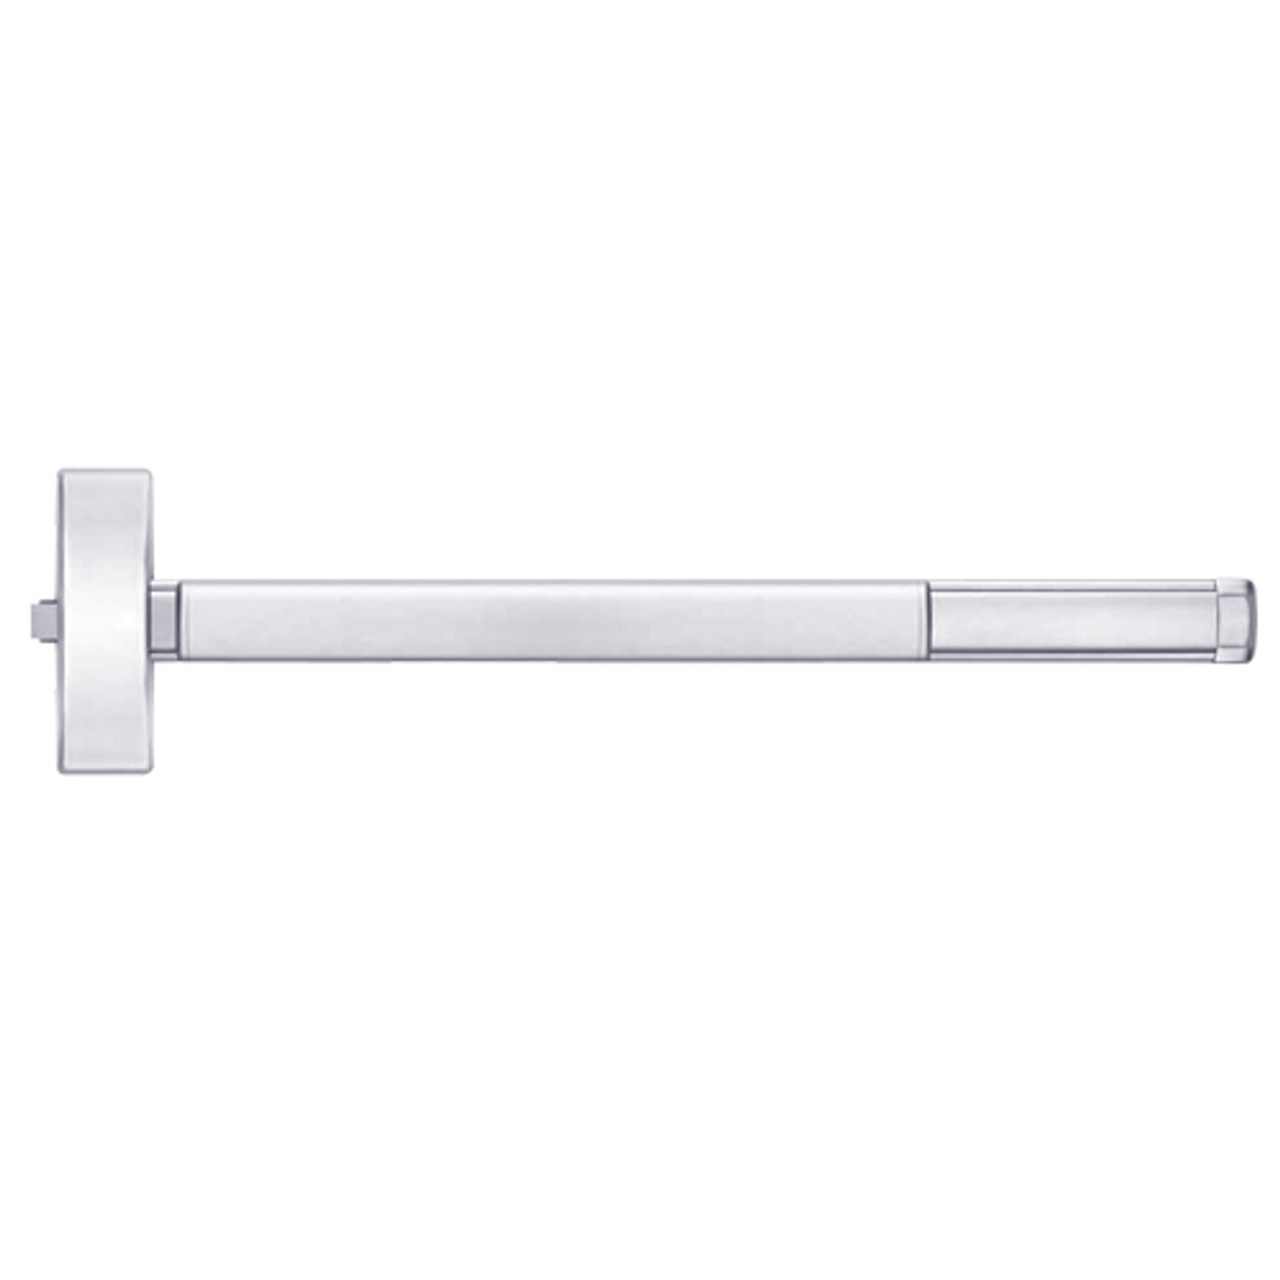 FL2114-625-36 PHI 2100 Series Fire Rated Apex Rim Exit Device Prepped for Lever-Knob Always Active in Bright Chrome Finish